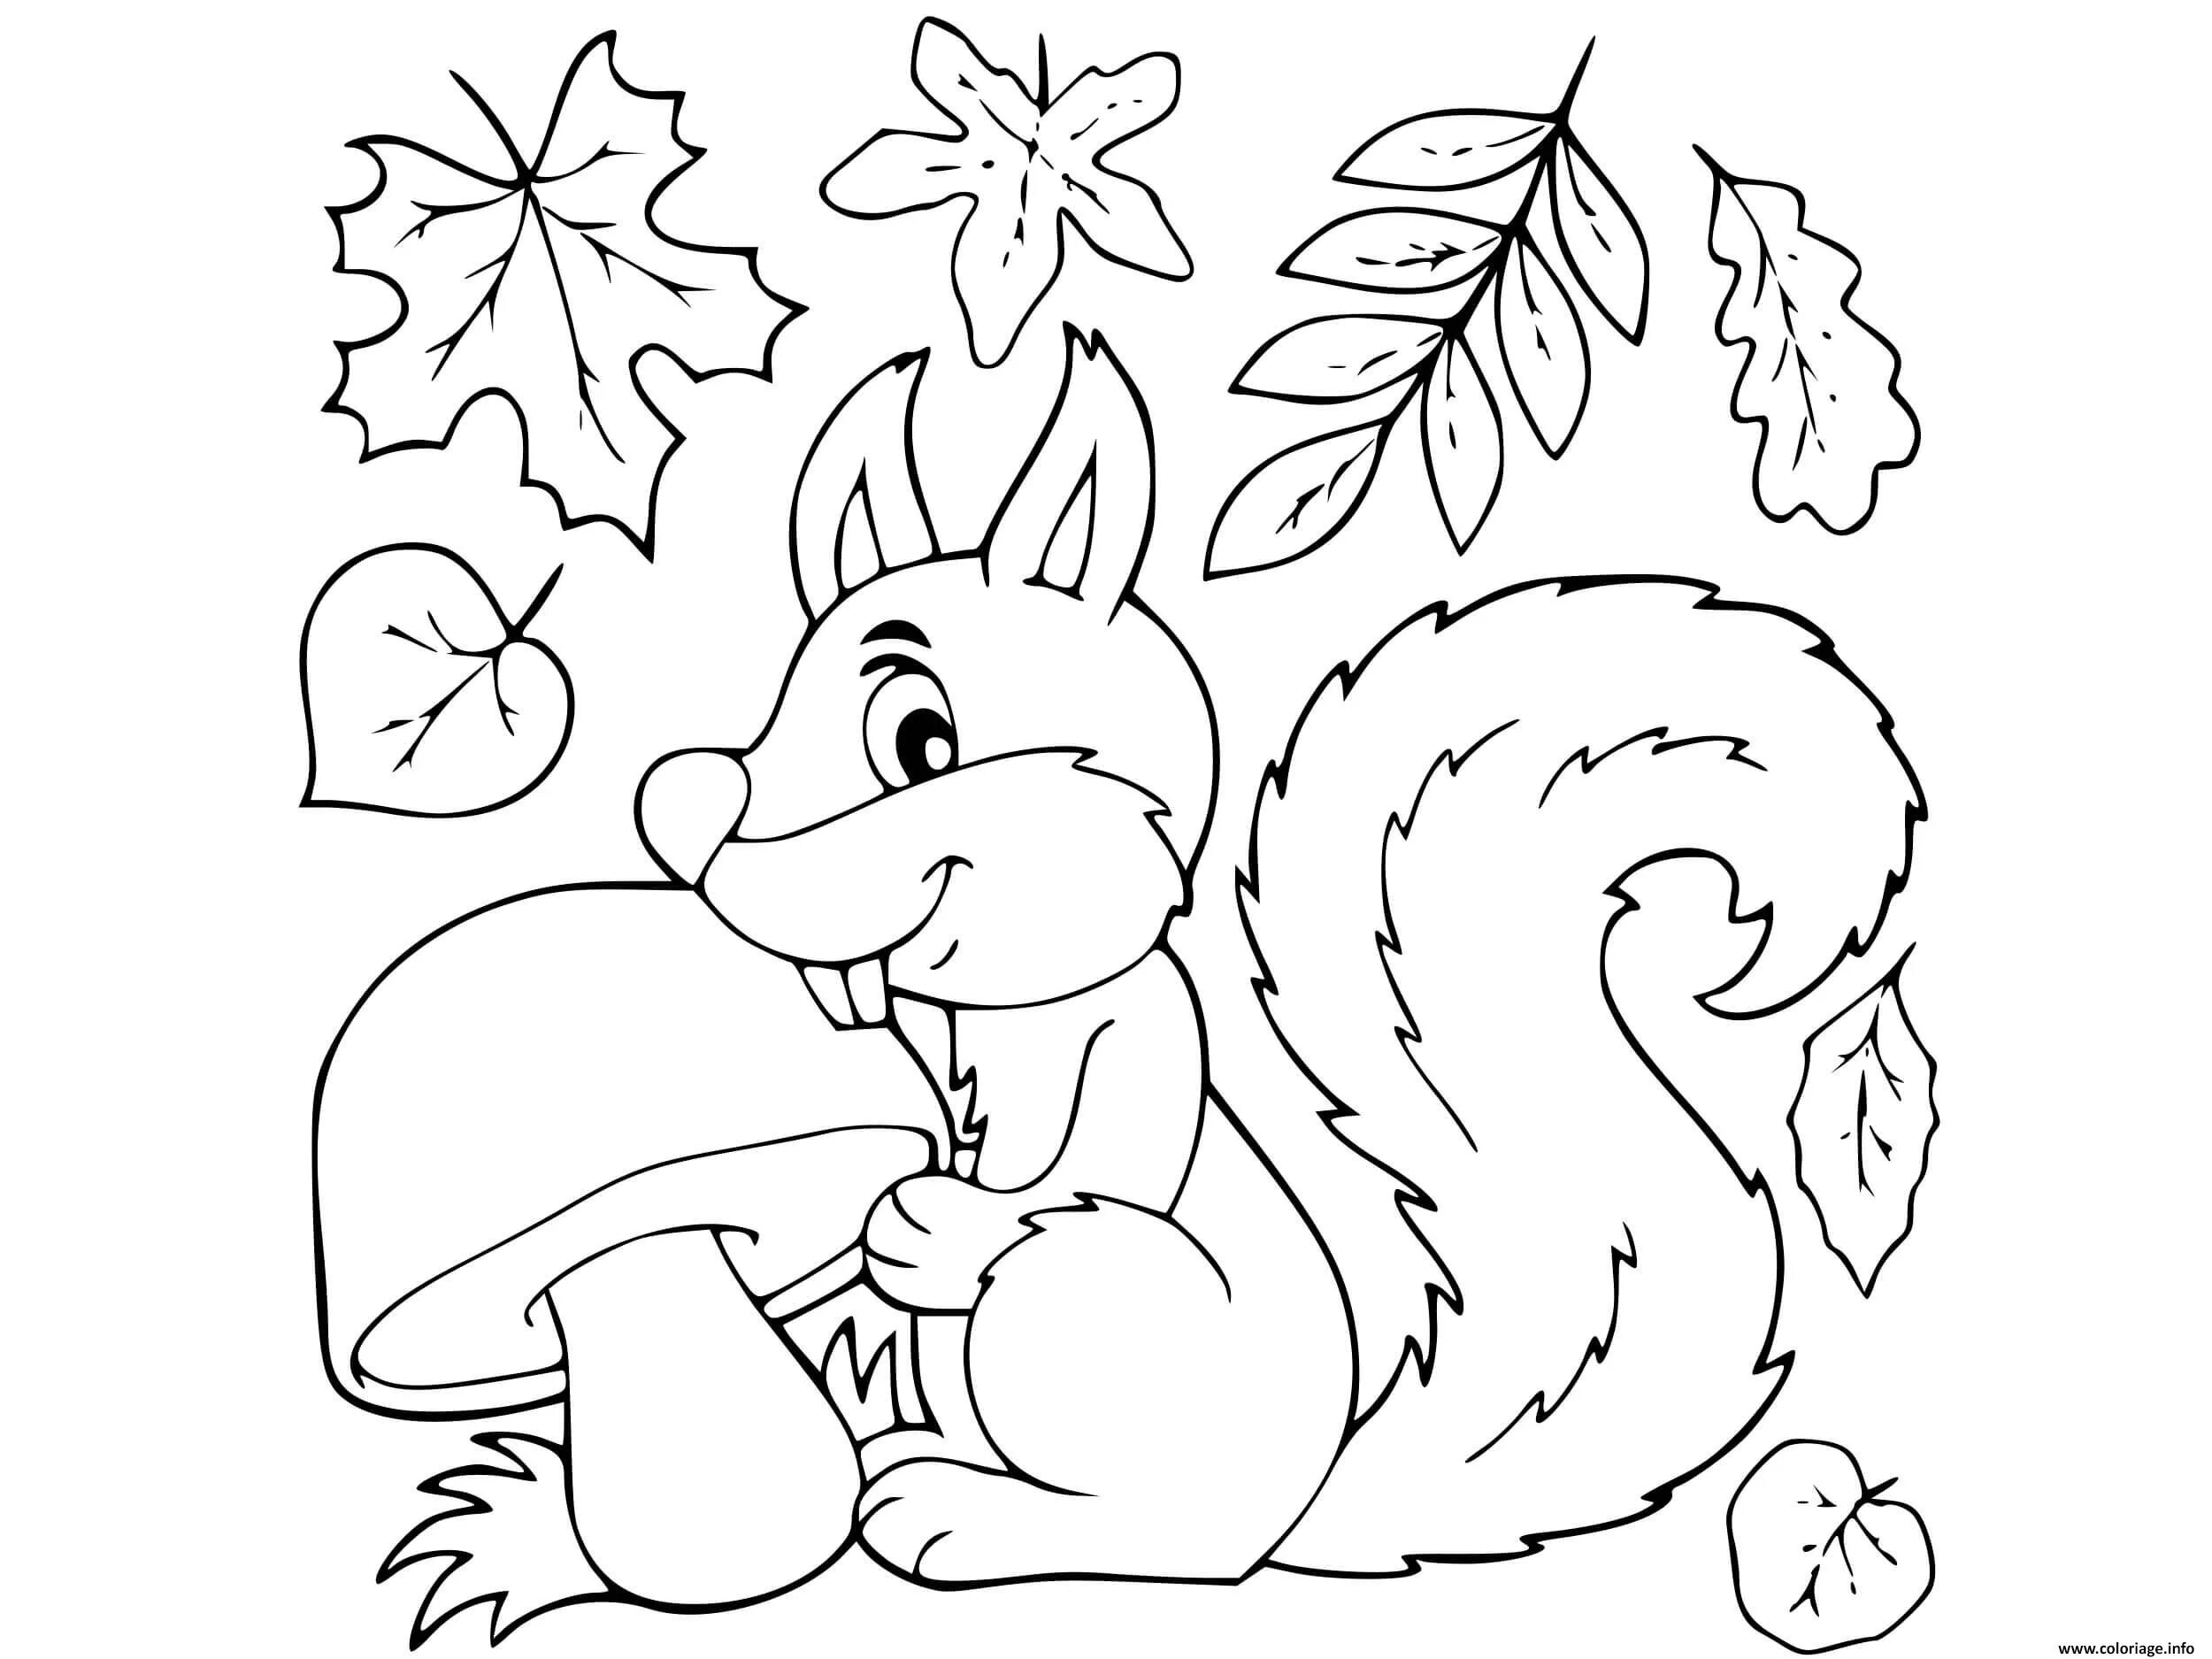 Coloring page charming squirrel